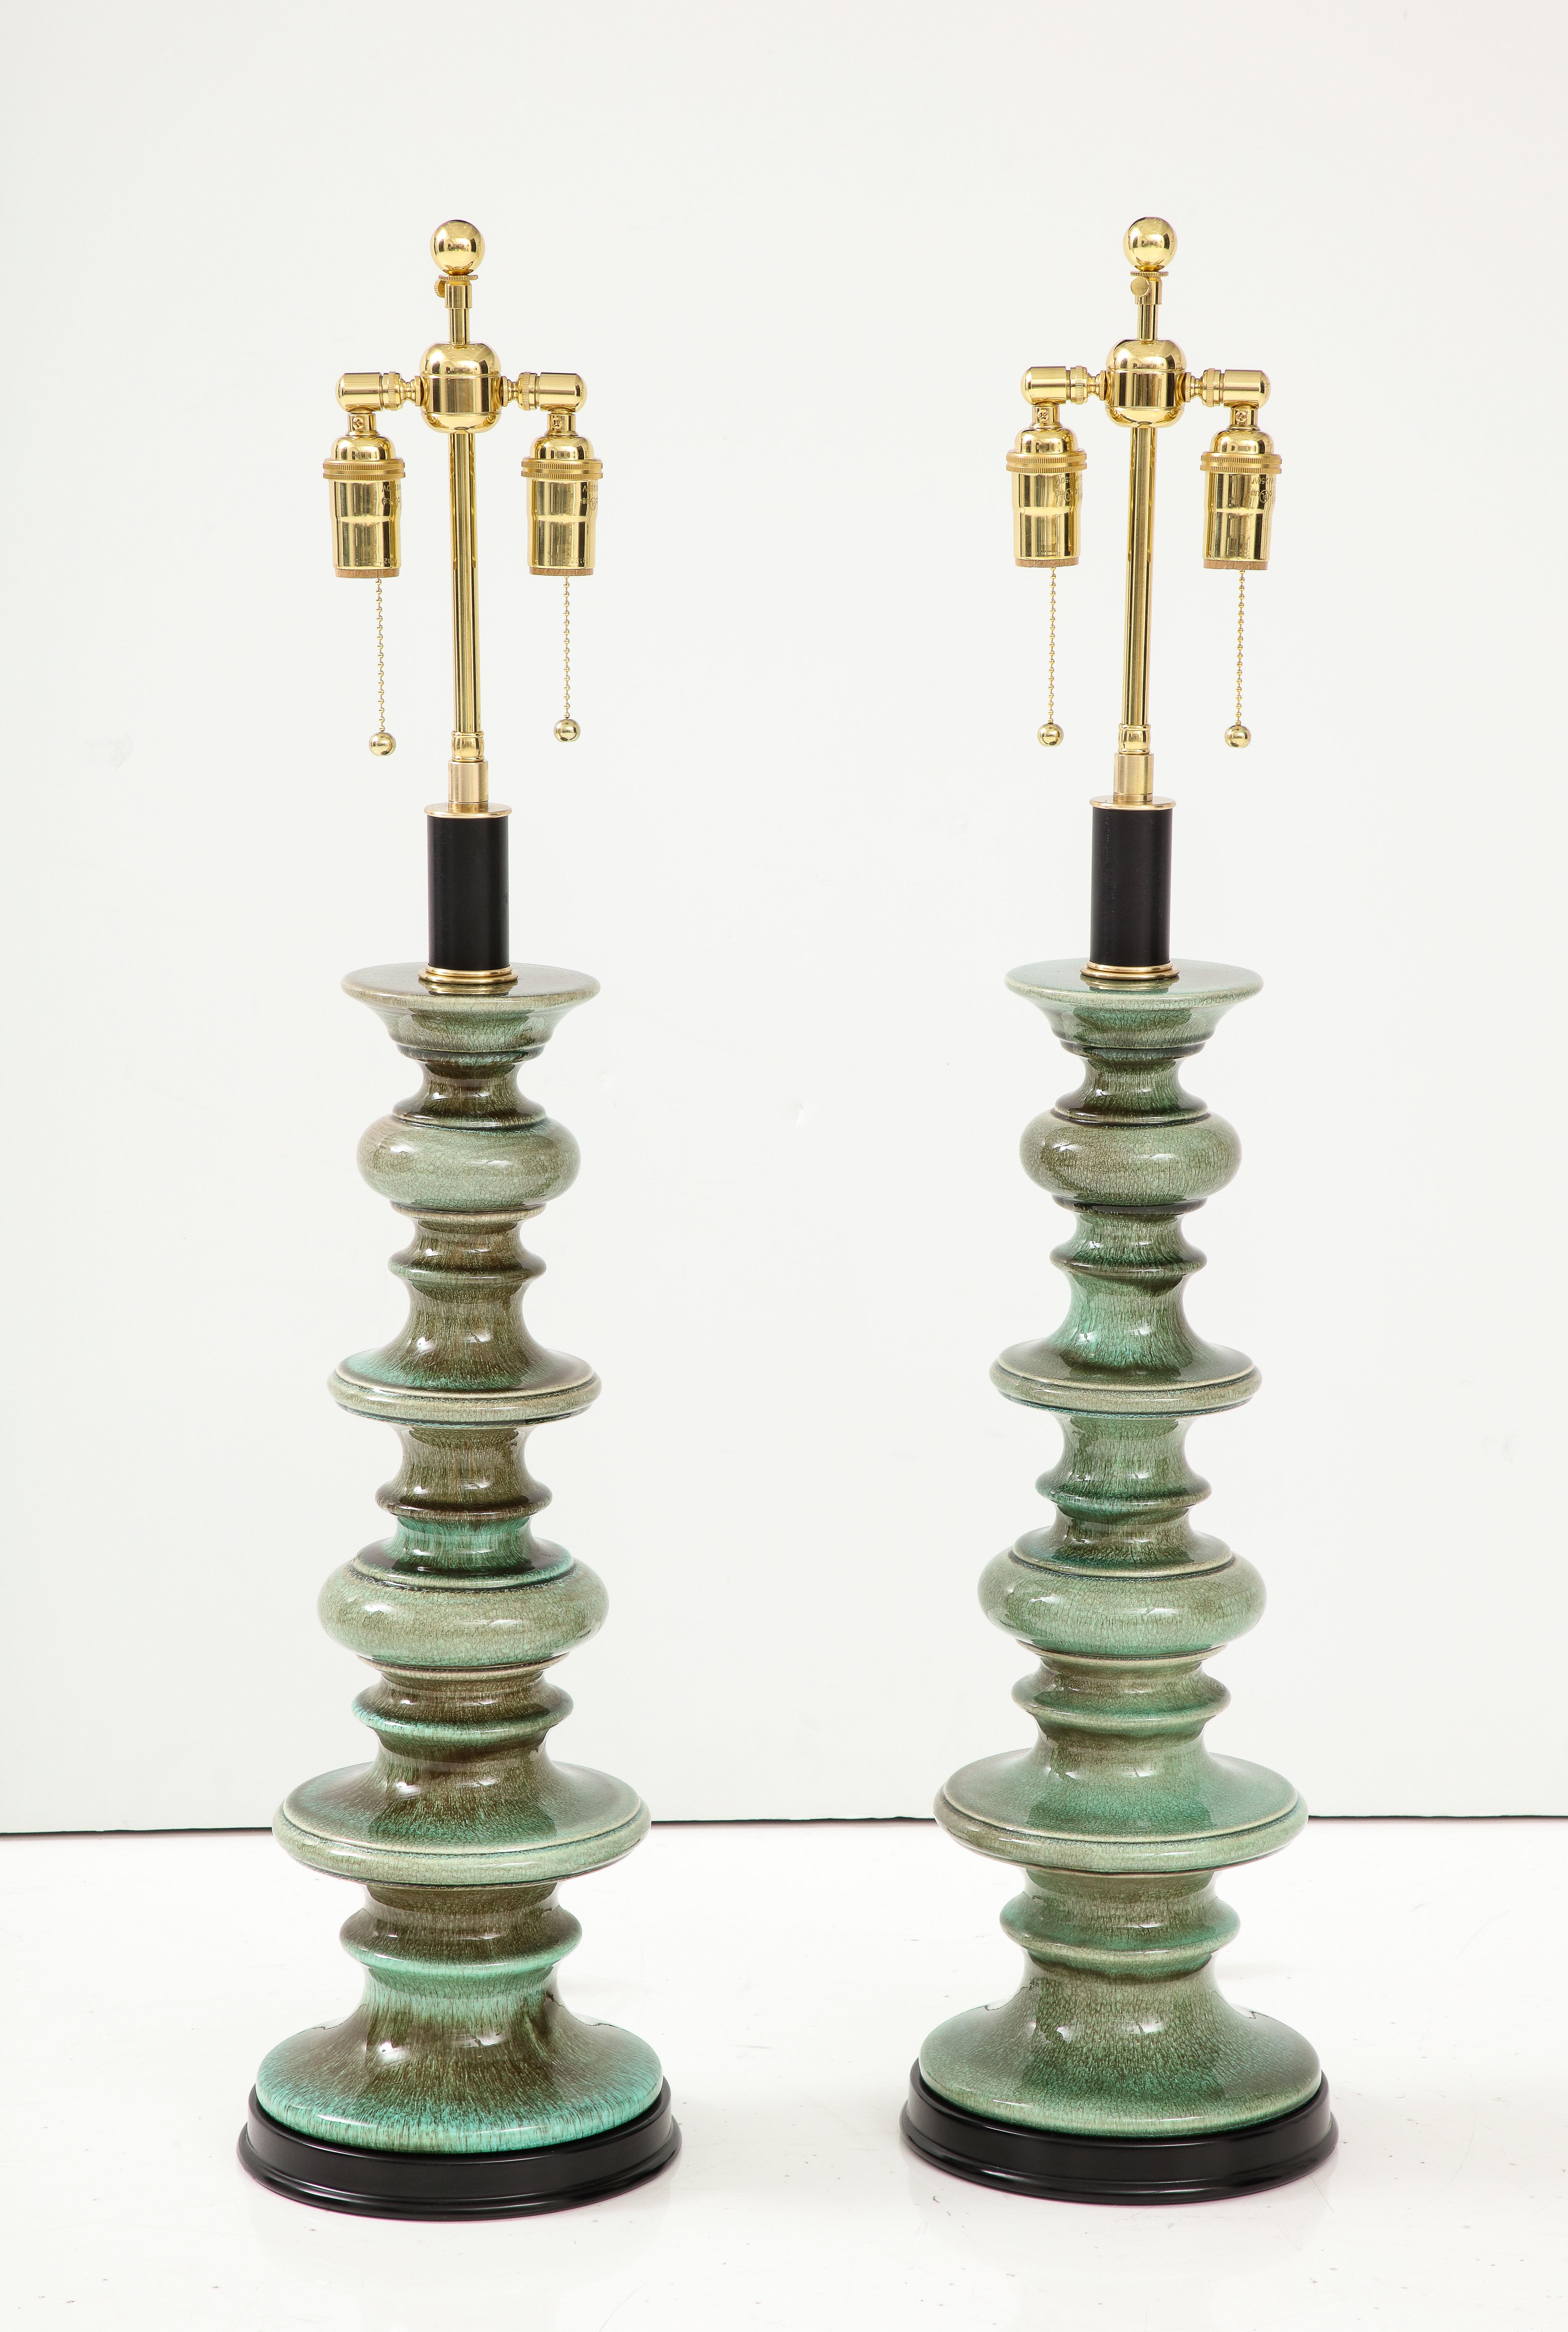 Pair of large ceramic lamps with a beautiful Jade Green crackle glaze finish.
The lamps have been Newly rewired with adjustable polished brass double clusters and silk rayon cords.
The lamps take standard size light bulbs and 60 watts per